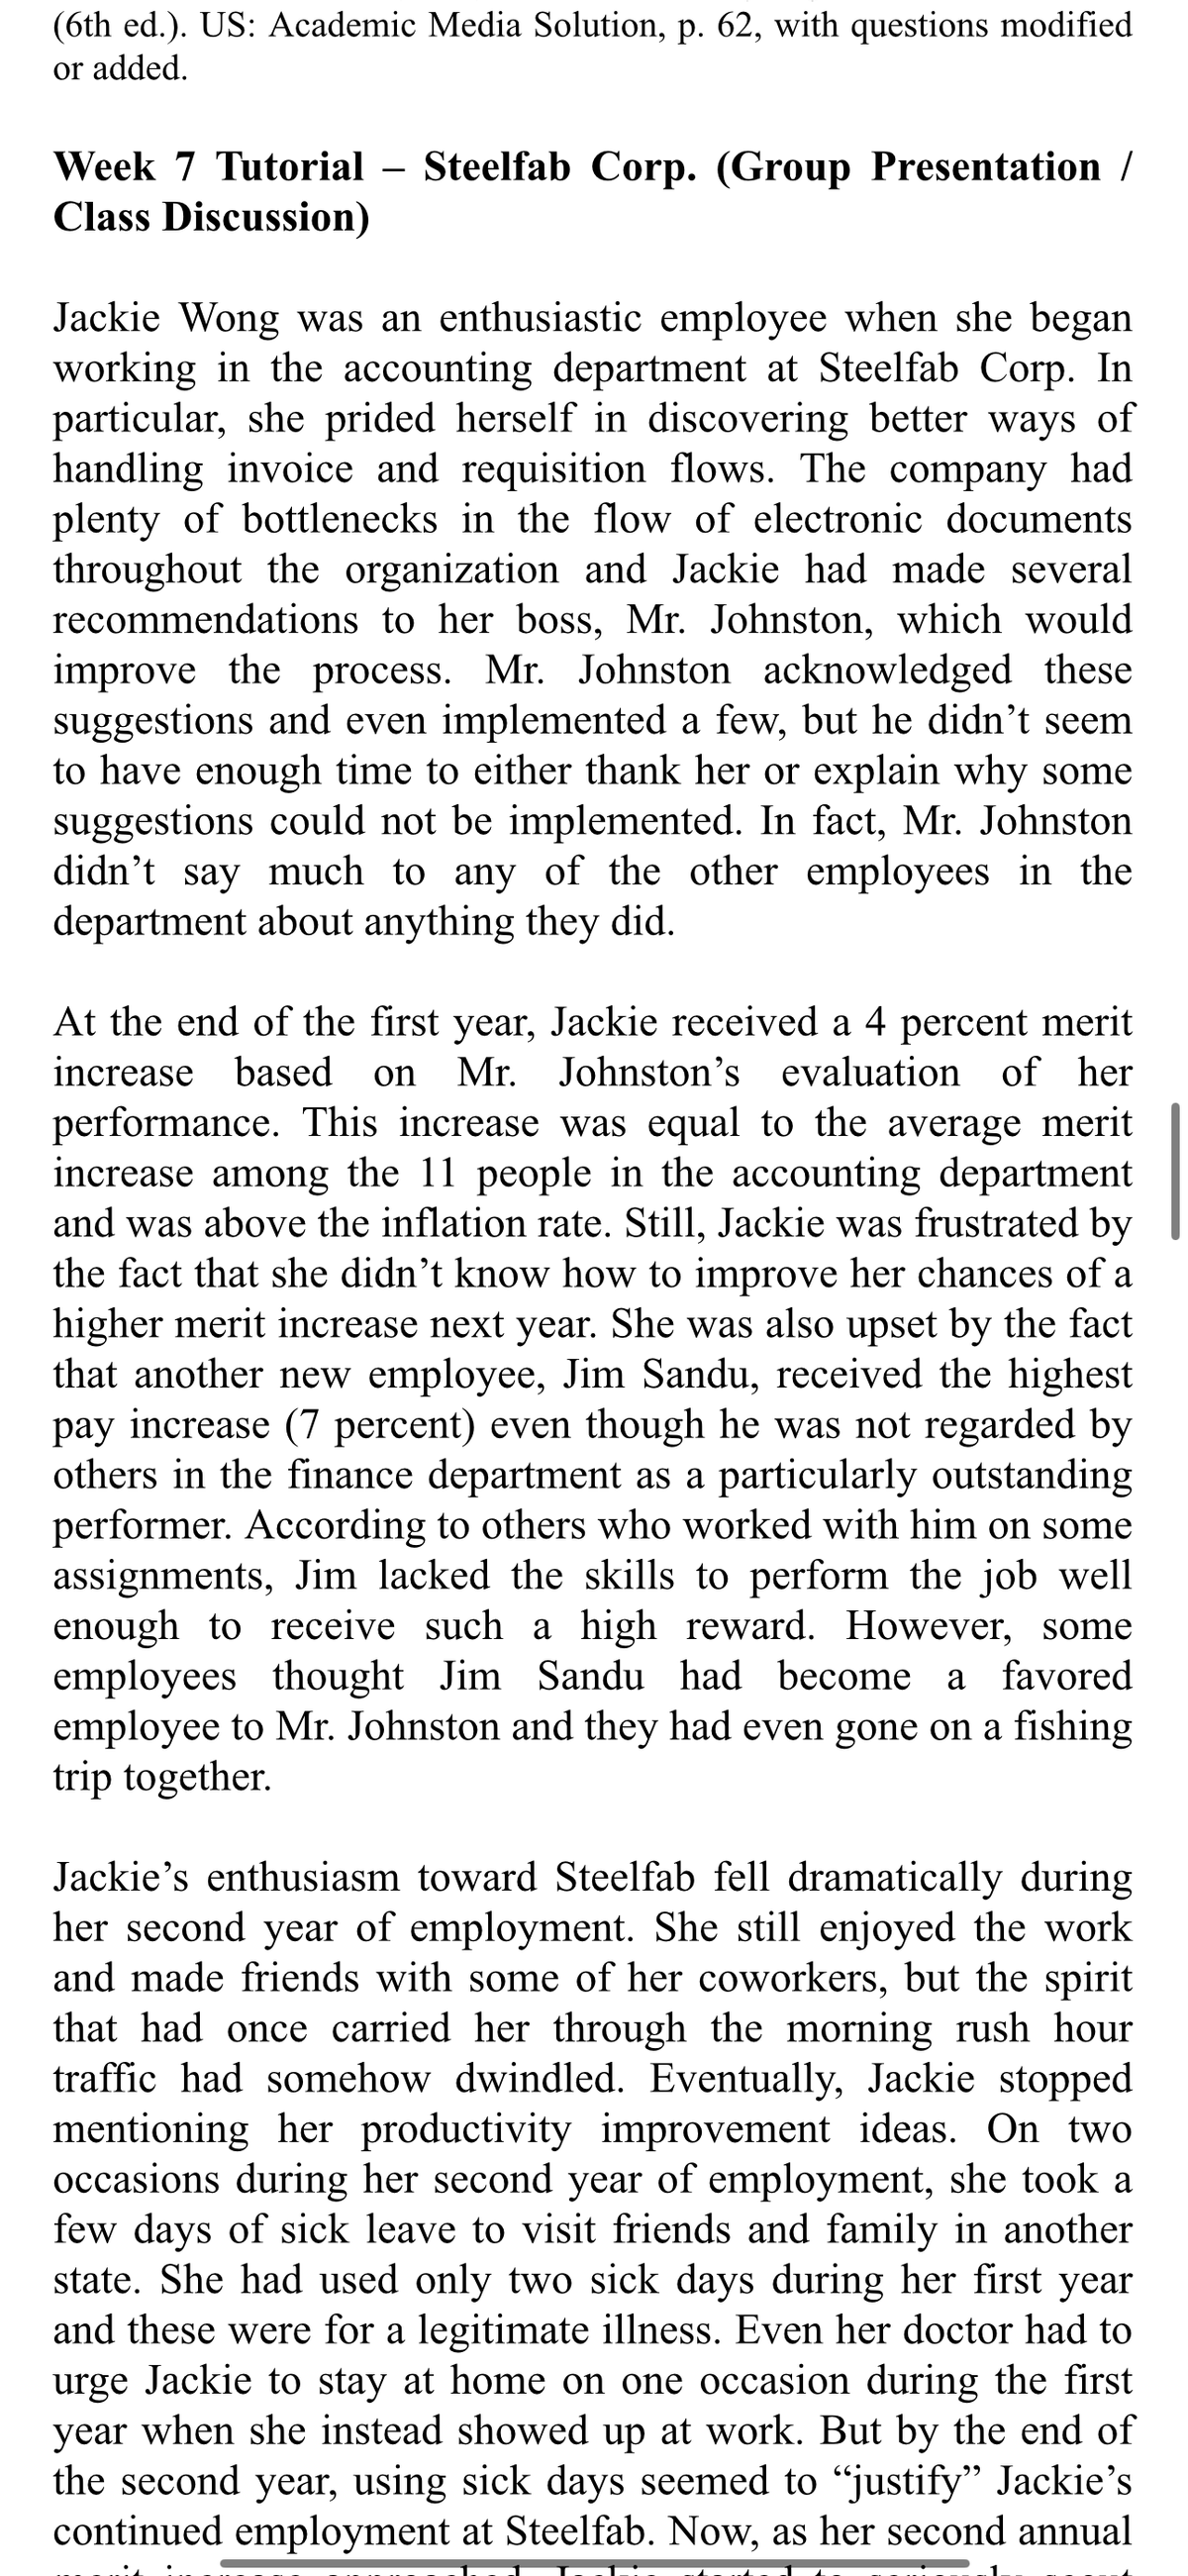 (6th ed.). US: Academic Media Solution, p. 62, with questions modified
or added.
Week 7 Tutorial - Steelfab Corp. (Group Presentation /
Class Discussion)
Jackie Wong was an enthusiastic employee when she began
working in the accounting department at Steelfab Corp. In
particular, she prided herself in discovering better ways of
handling invoice and requisition flows. The company had
plenty of bottlenecks in the flow of electronic documents
throughout the organization and Jackie had made several
recommendations to her boss, Mr. Johnston, which would
improve the process. Mr. Johnston acknowledged these
suggestions and even implemented a few, but he didn't seem
to have enough time to either thank her or explain why some
suggestions could not be implemented. In fact, Mr. Johnston
didn't say much to any of the other employees in the
department about anything they did.
At the end of the first year, Jackie received a 4 percent merit
increase based on Mr. Johnston's evaluation of her
performance. This increase was equal to the average merit
increase among the 11 people in the accounting department
and was above the inflation rate. Still, Jackie was frustrated by
the fact that she didn't know how to improve her chances of a
higher merit increase next year. She was also upset by the fact
that another new employee, Jim Sandu, received the highest
pay increase (7 percent) even though he was not regarded by
others in the finance department as a particularly outstanding
performer. According to others who worked with him on some
assignments, Jim lacked the skills to perform the job well
enough to receive such a high reward. However, some
employees thought Jim Sandu had become a favored
employee to Mr. Johnston and they had even gone on a fishing
trip together.
Jackie's enthusiasm toward Steelfab fell dramatically during
her second year of employment. She still enjoyed the work
and made friends with some of her coworkers, but the spirit
that had once carried her through the morning rush hour
traffic had somehow dwindled. Eventually, Jackie stopped
mentioning her productivity improvement ideas. On two
occasions during her second year of employment, she took a
few days of sick leave to visit friends and family in another
state. She had used only two sick days during her first year
and these were for a legitimate illness. Even her doctor had to
urge Jackie to stay at home on one occasion during the first
year when she instead showed up at work. But by the end of
the second year, using sick days seemed to "justify" Jackie's
continued employment at Steelfab. Now, as her second annual